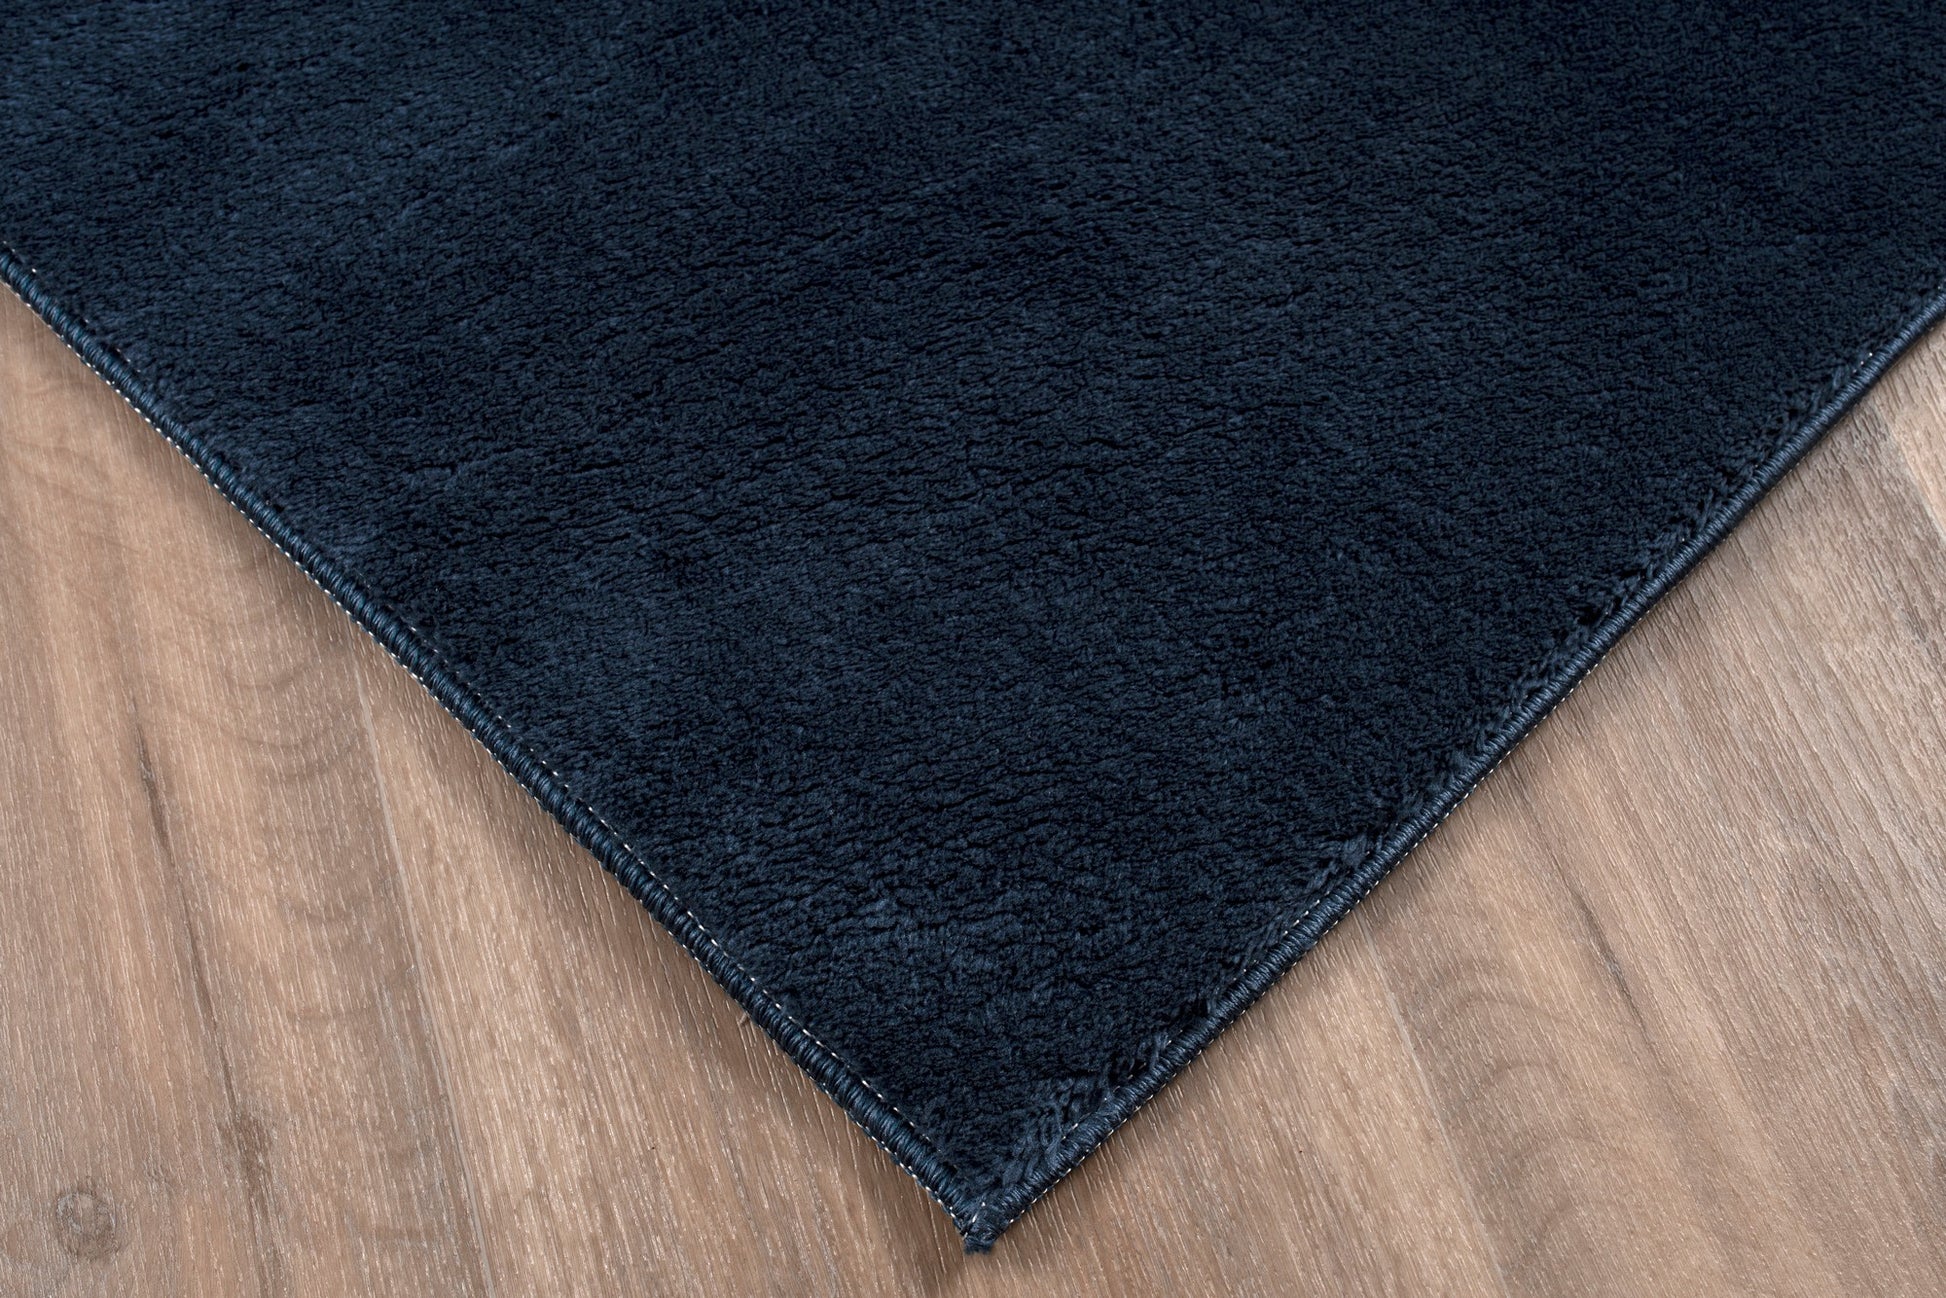 navy blue fluffy soft machine washable area rug for living room bedroom 4x6, 4x5 ft Small Carpet, Home Office, Living Room, Bedroom